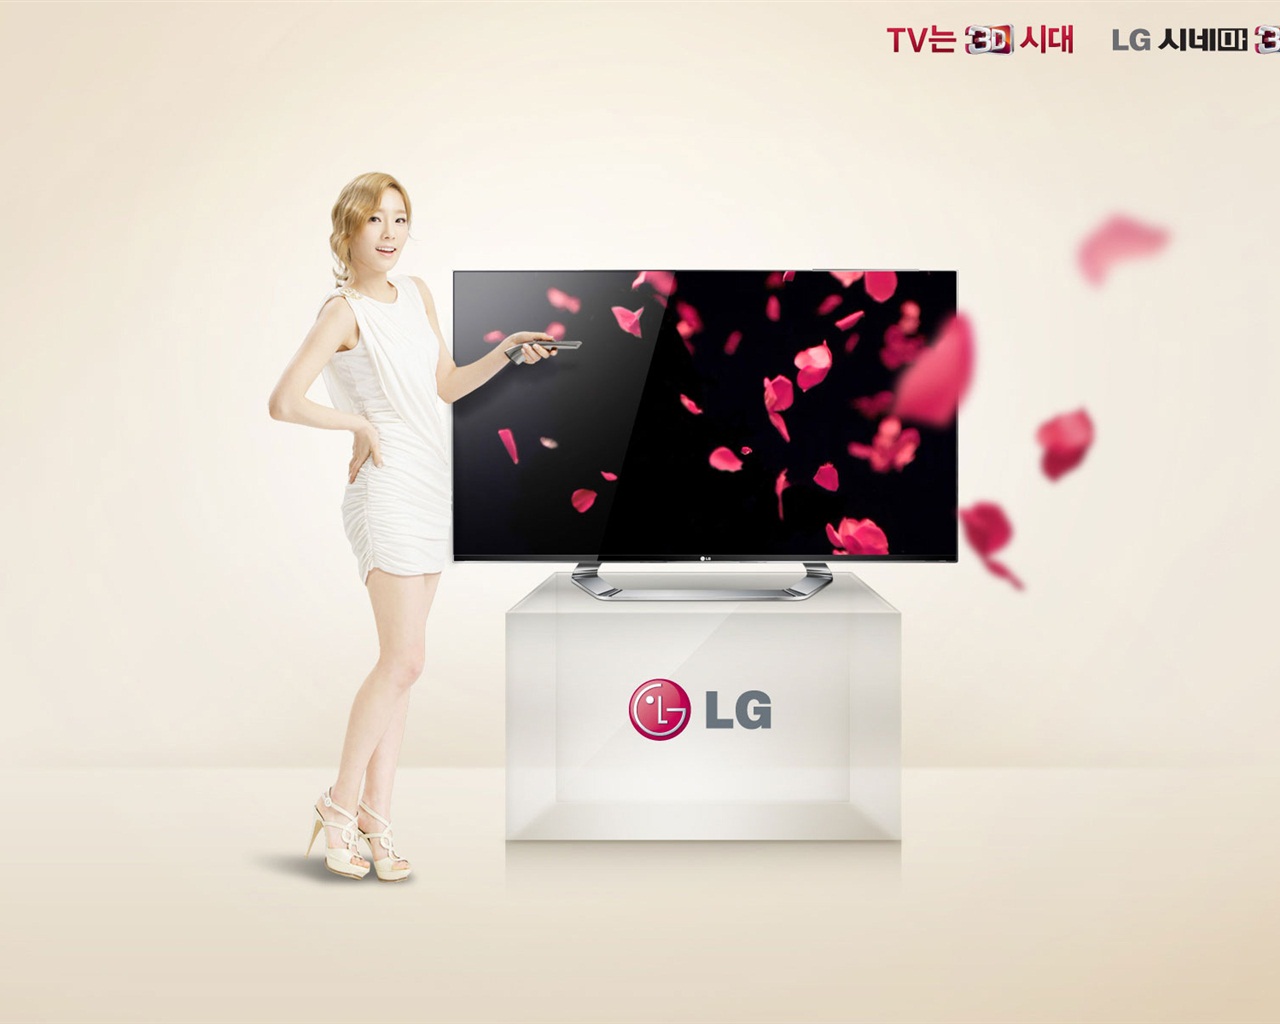 Girls Generation ACE and LG endorsements ads HD wallpapers #14 - 1280x1024